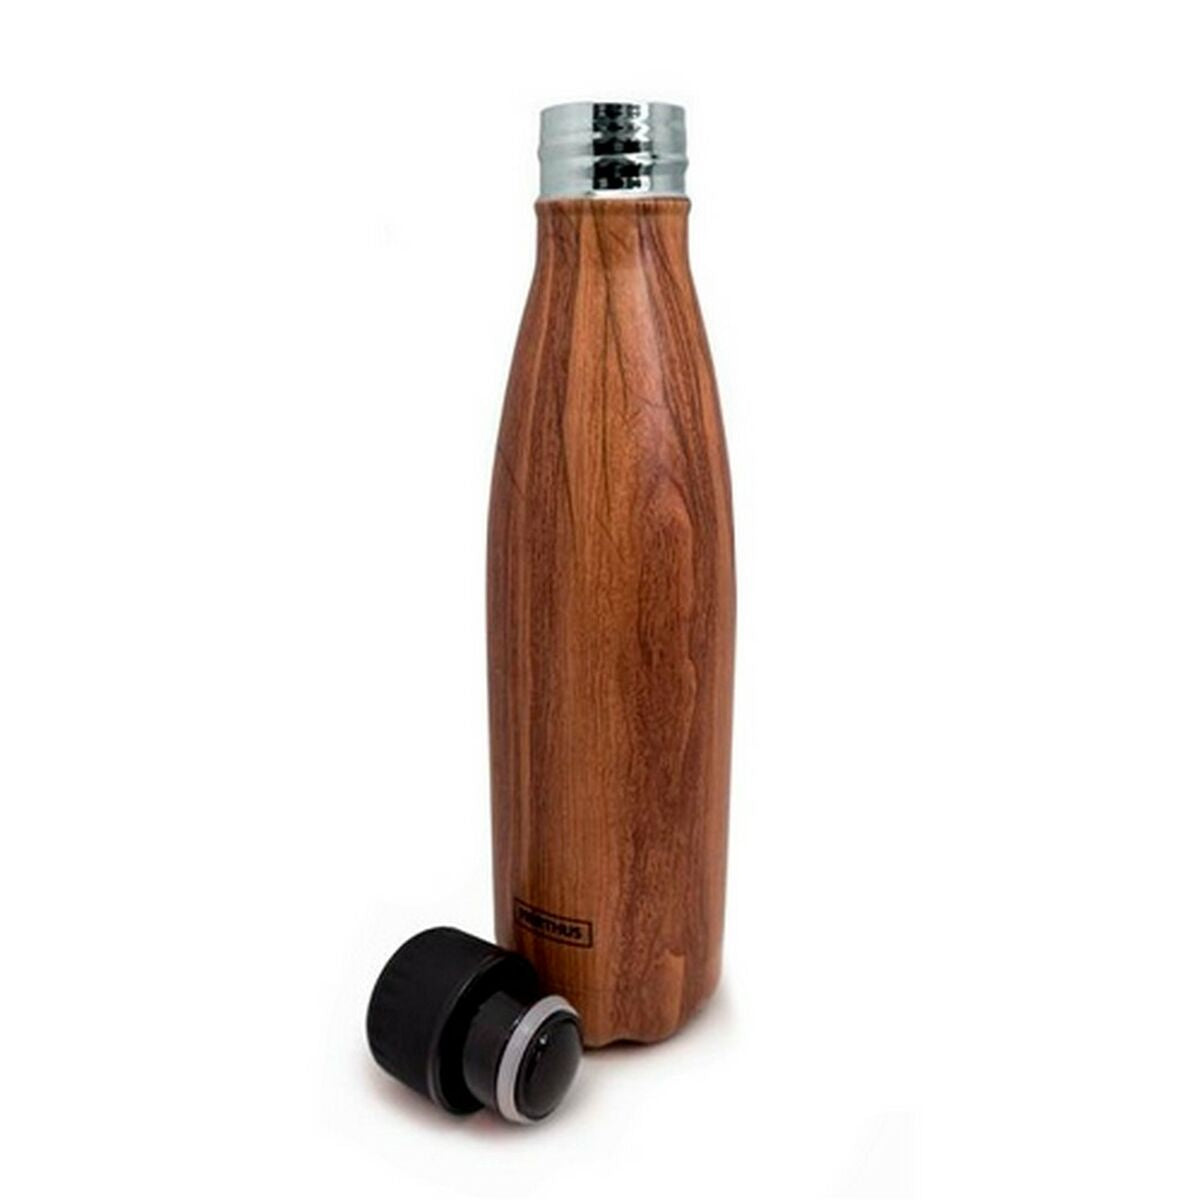 Thermosflasche Vin Bouquet Holz 500 ml